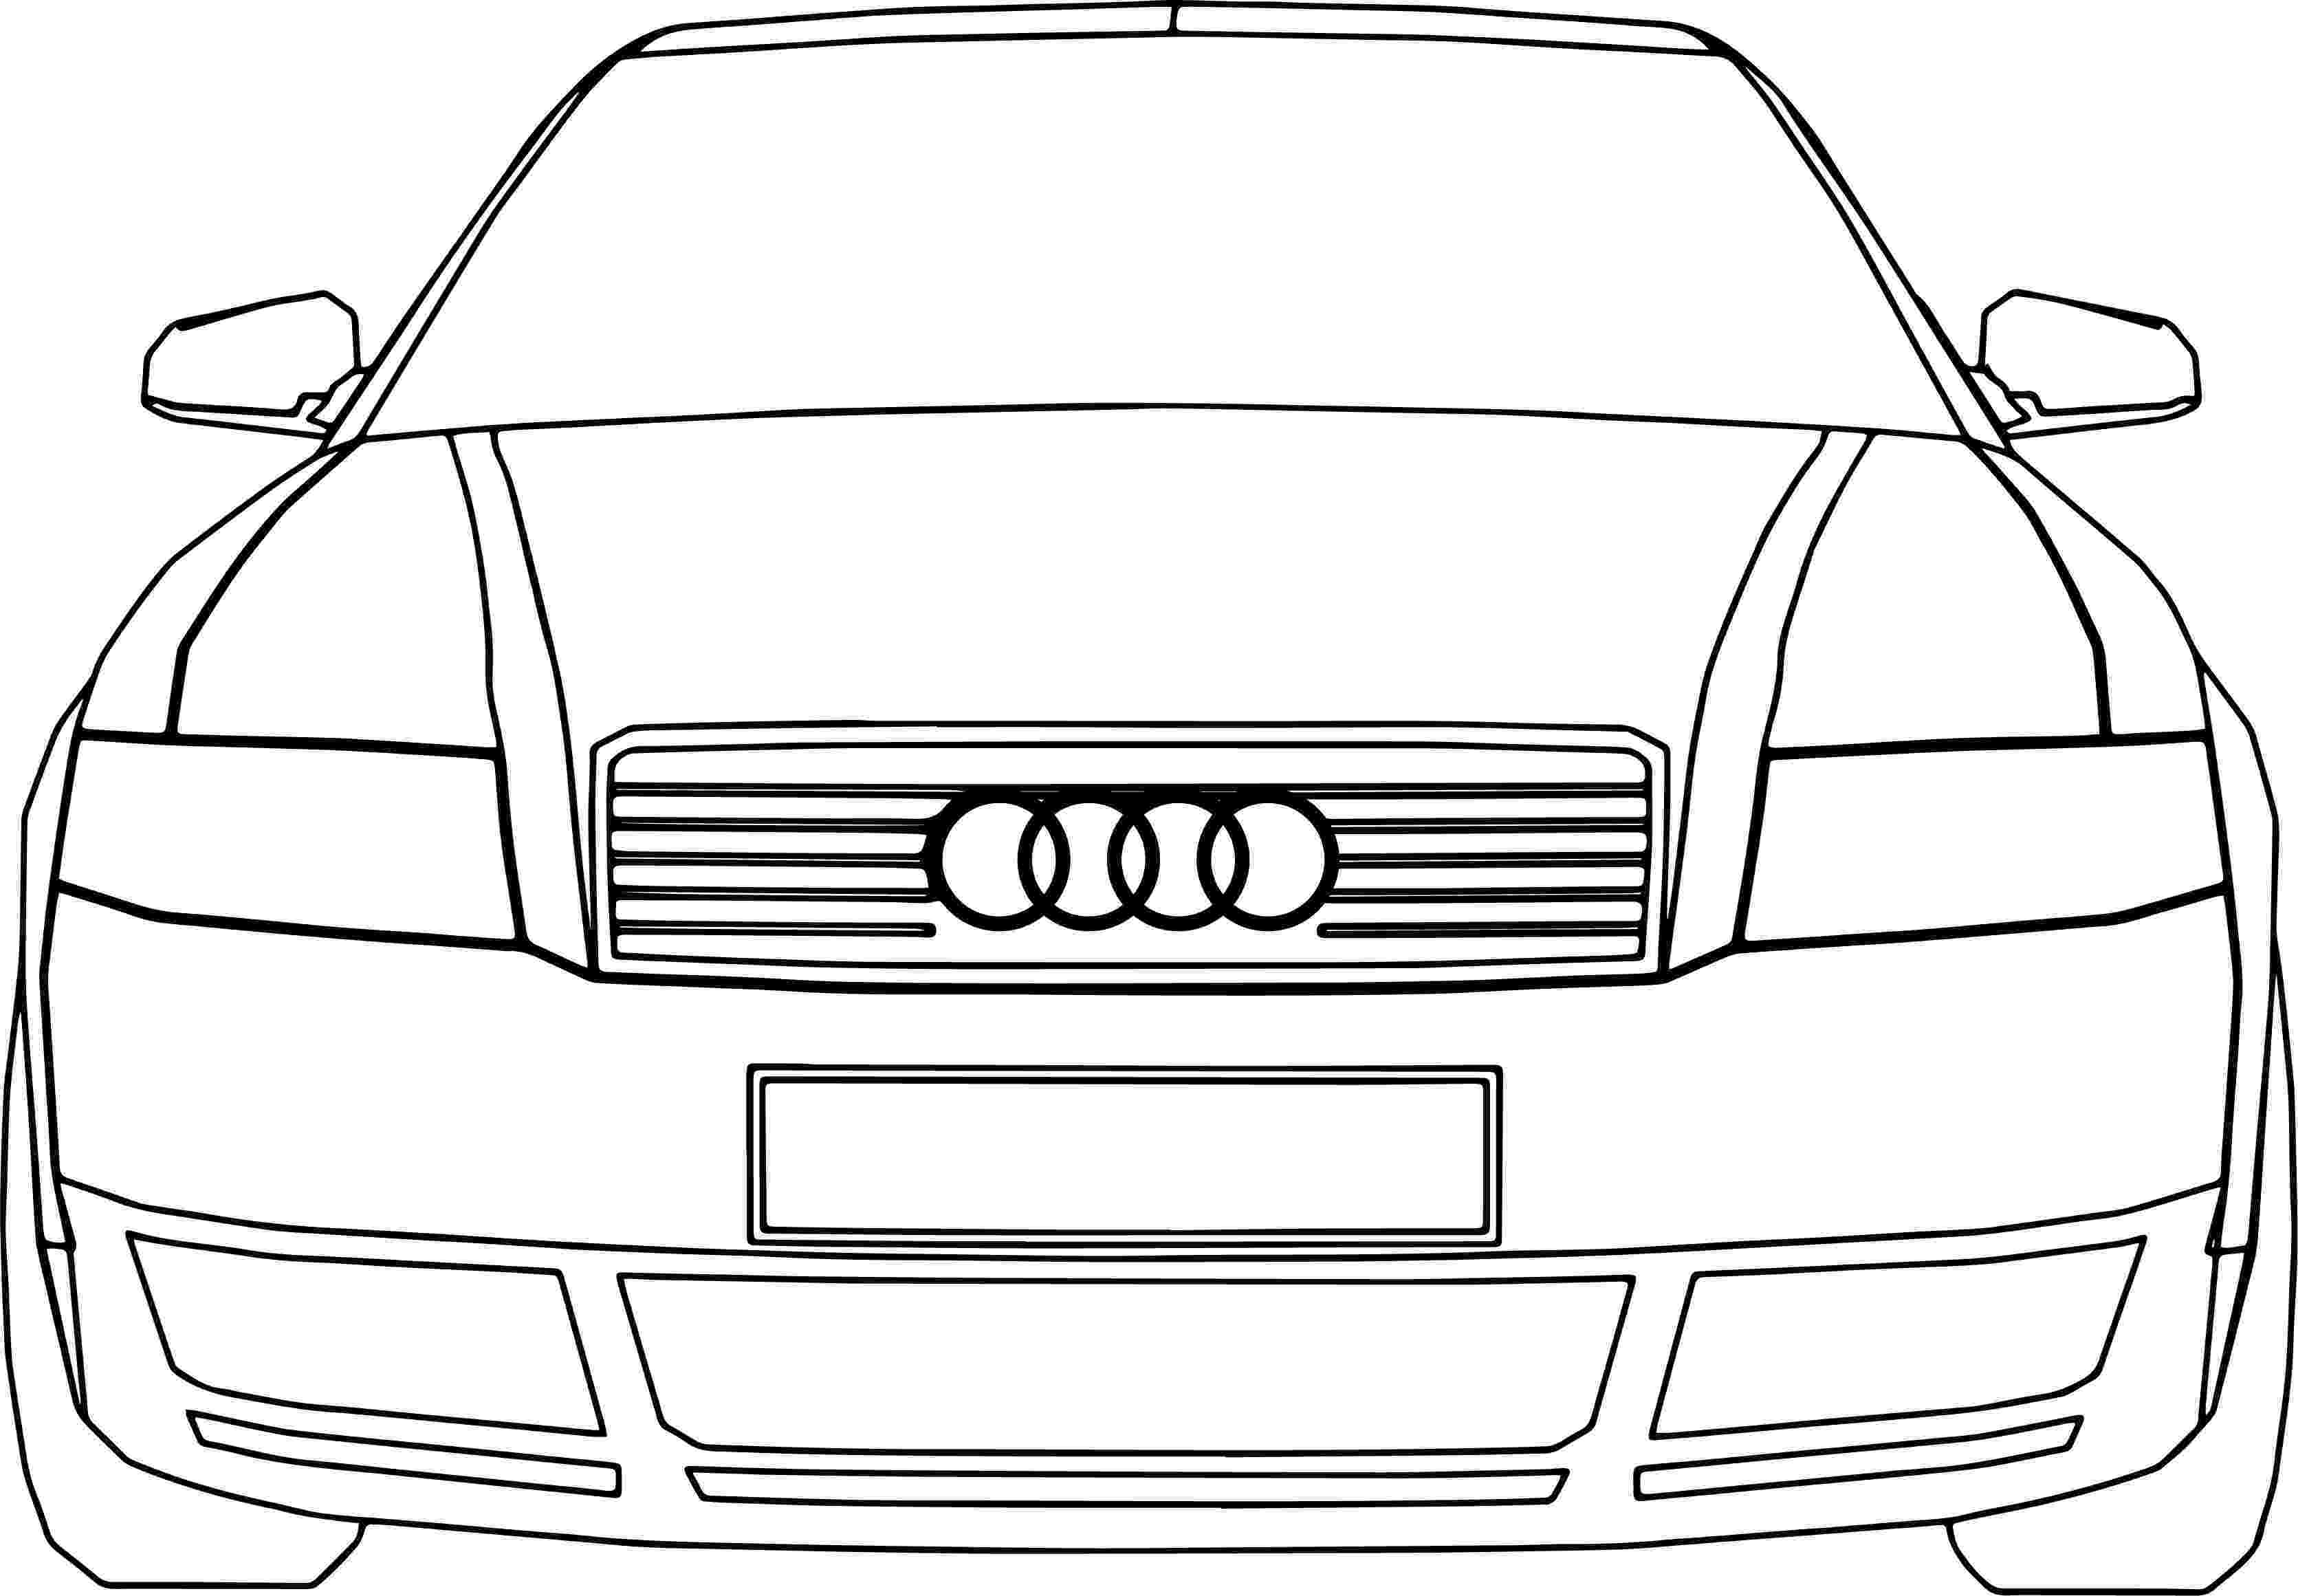 one direction colouring pages a4 2004 audi a4 engine diagram sketch coloring page one pages a4 colouring direction 